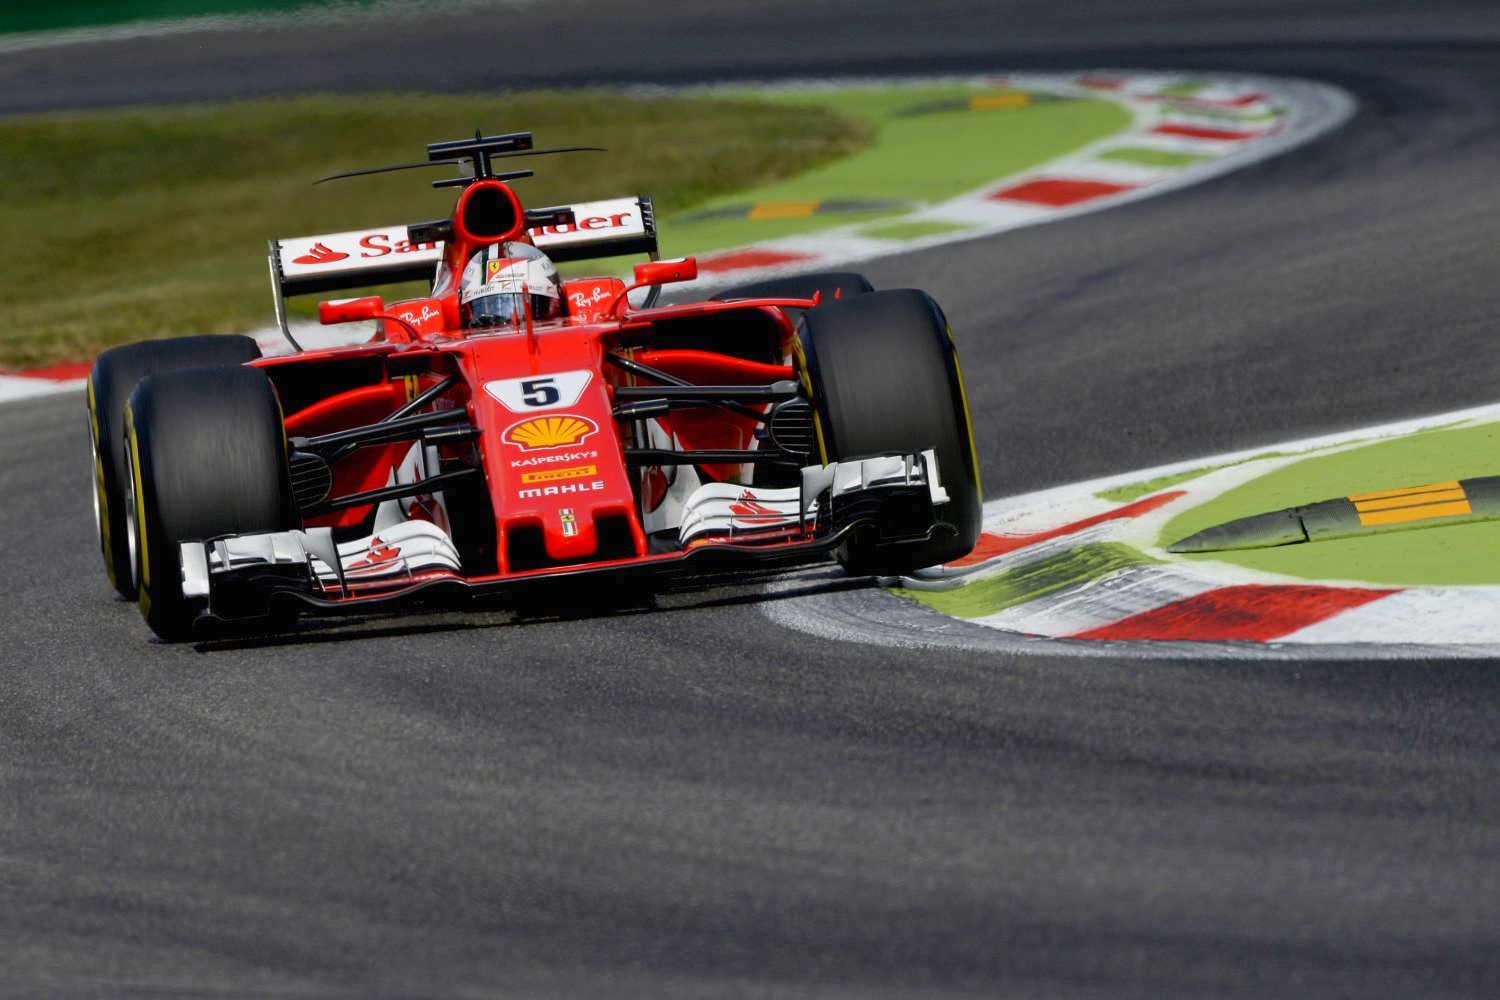 Vettel could not keep up in the inferior Ferrari